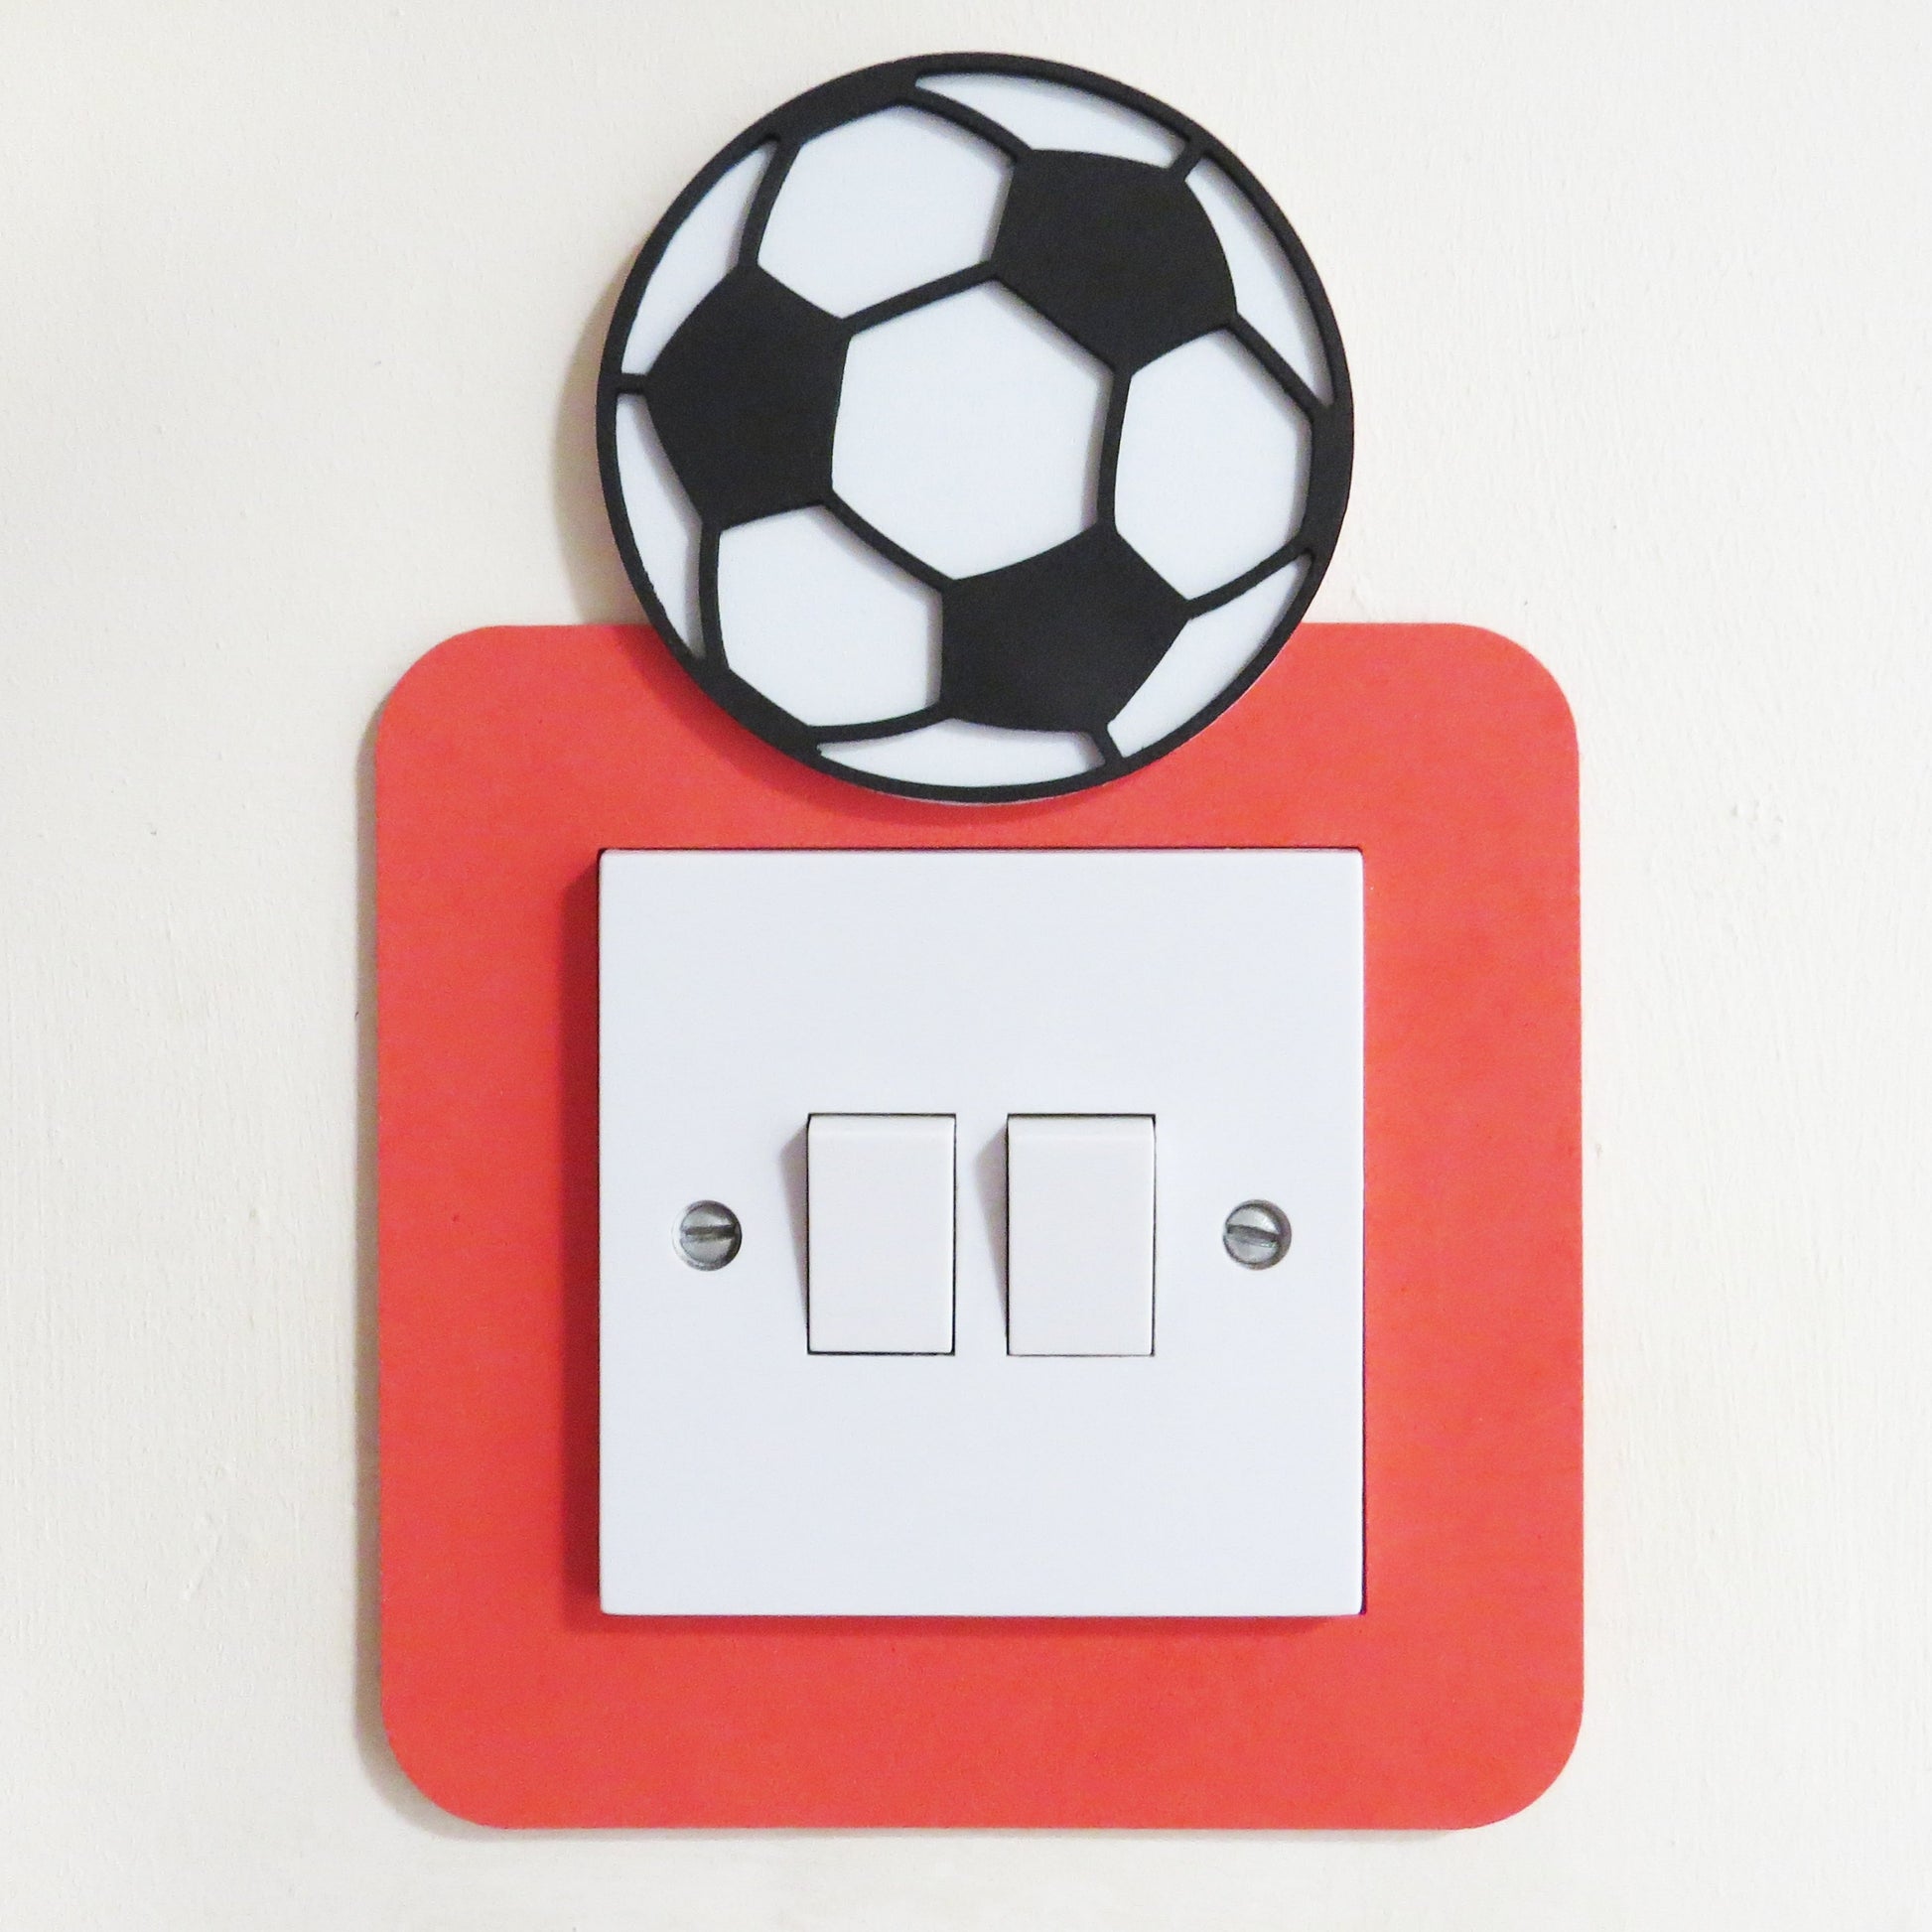 Red craft foam light switch surround designed with a black and white football